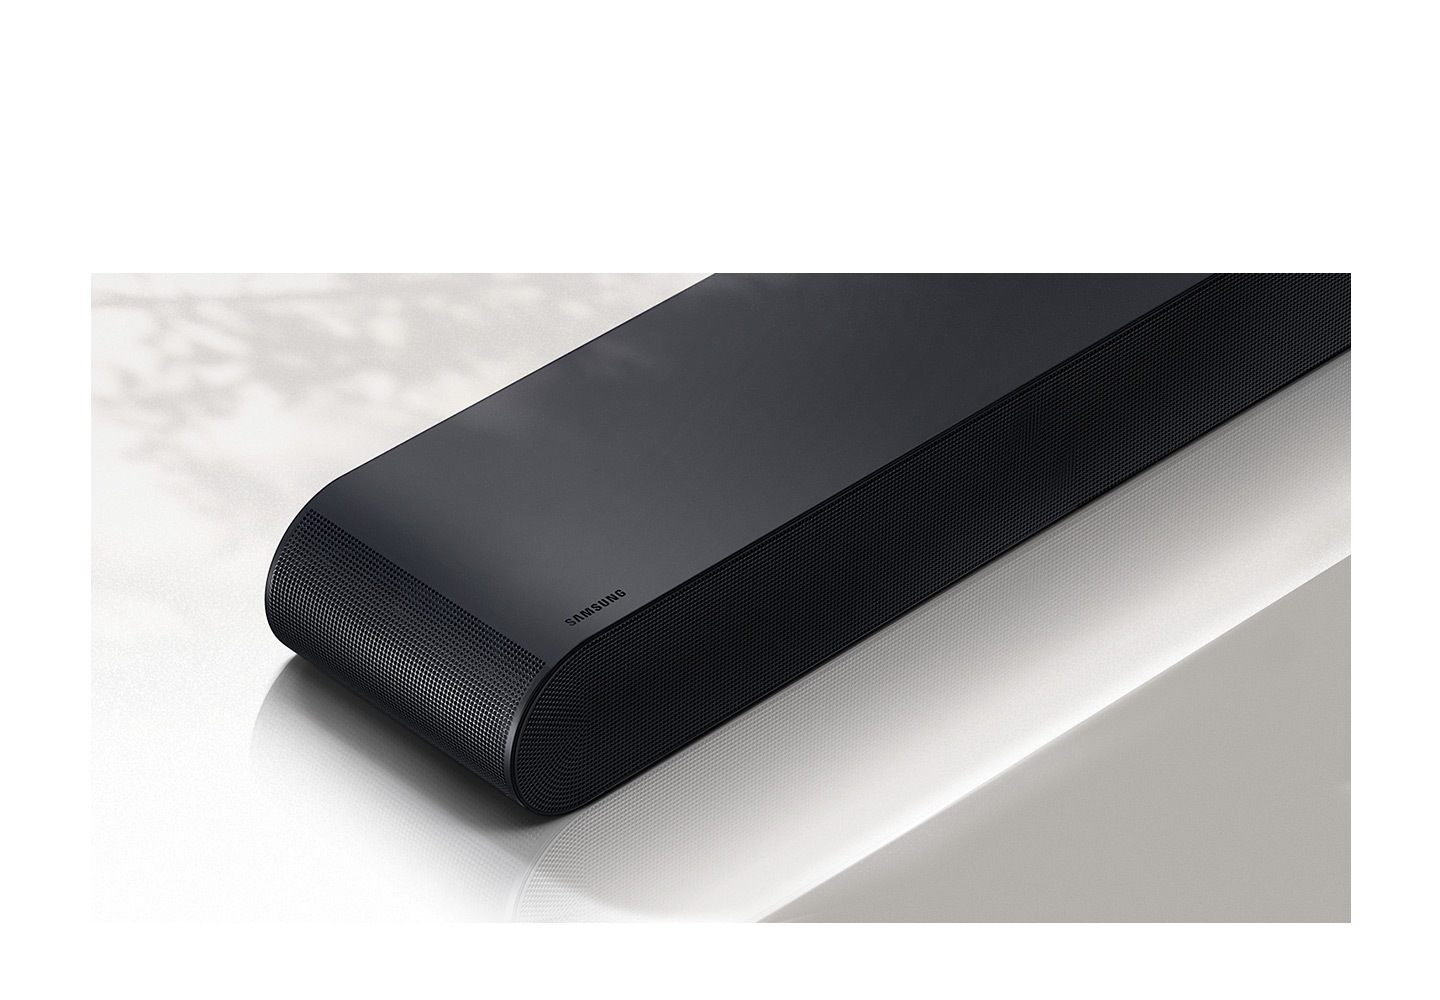 Closeup view of S60B soundbar which is shown in front with Samsung logo visible.